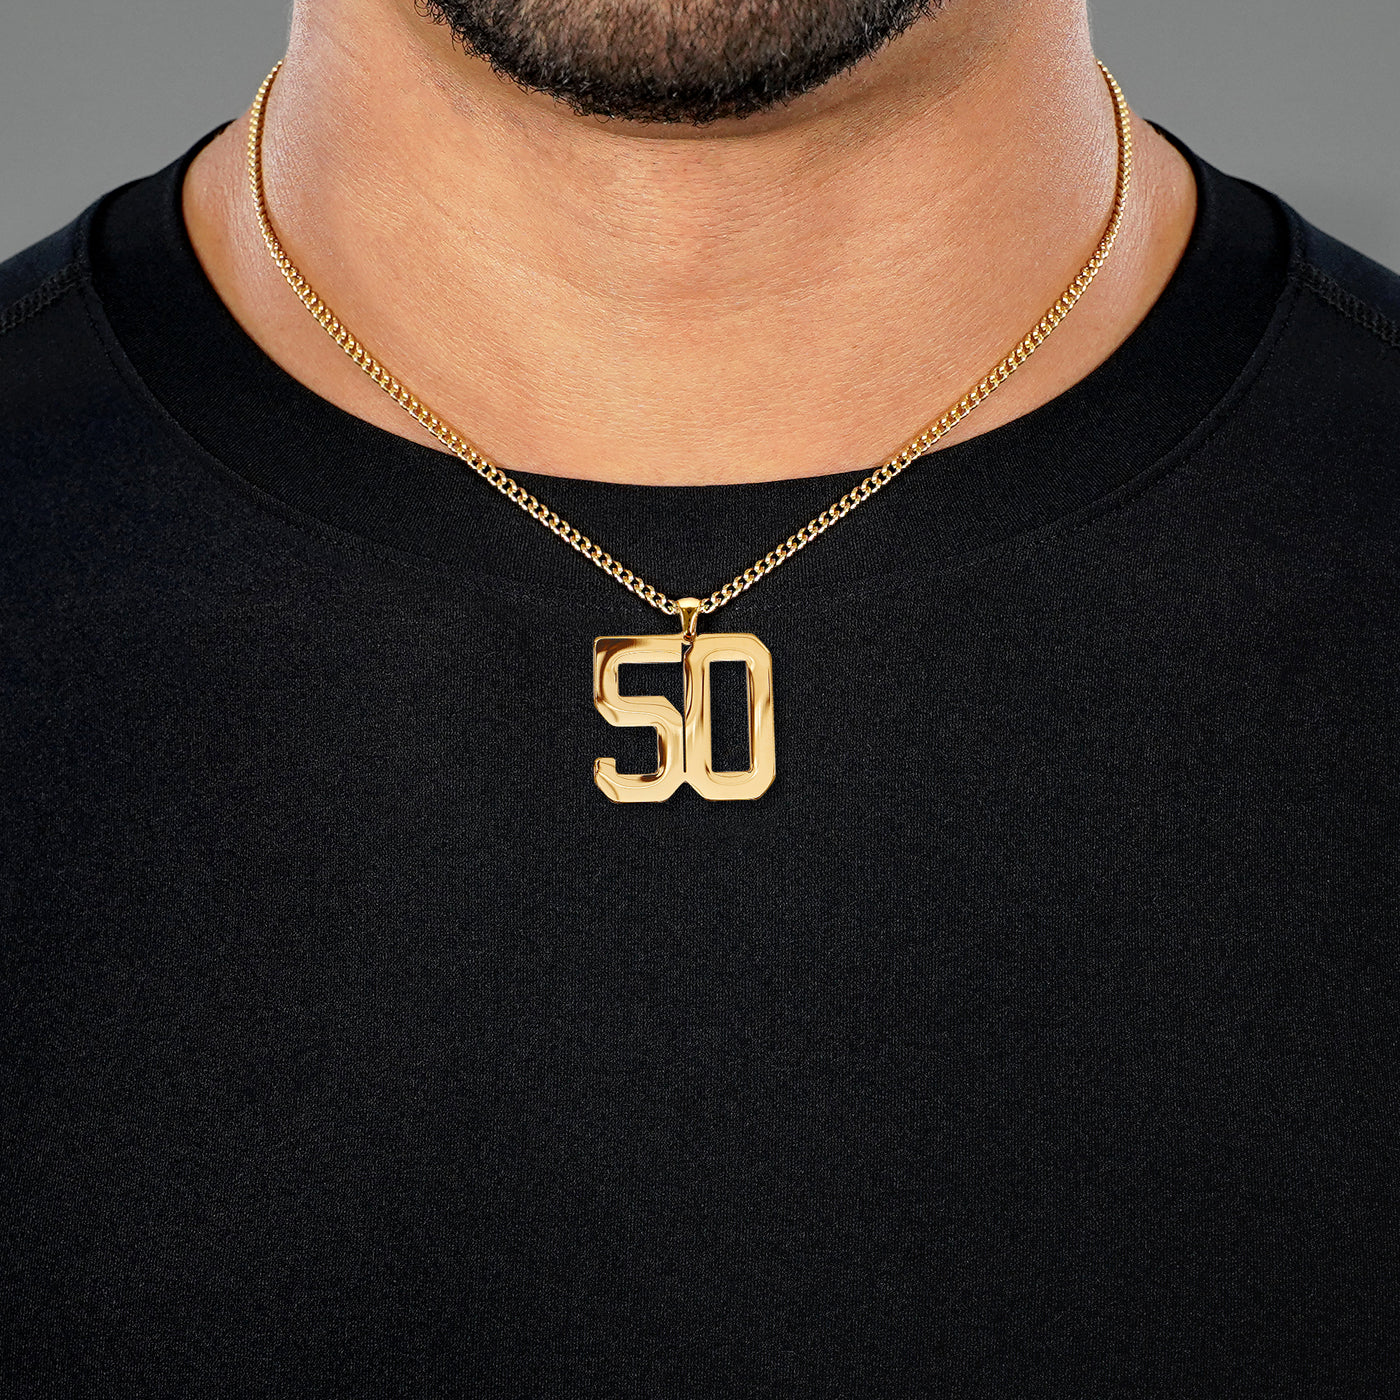 50 Number Pendant with Chain Necklace - Gold Plated Stainless Steel